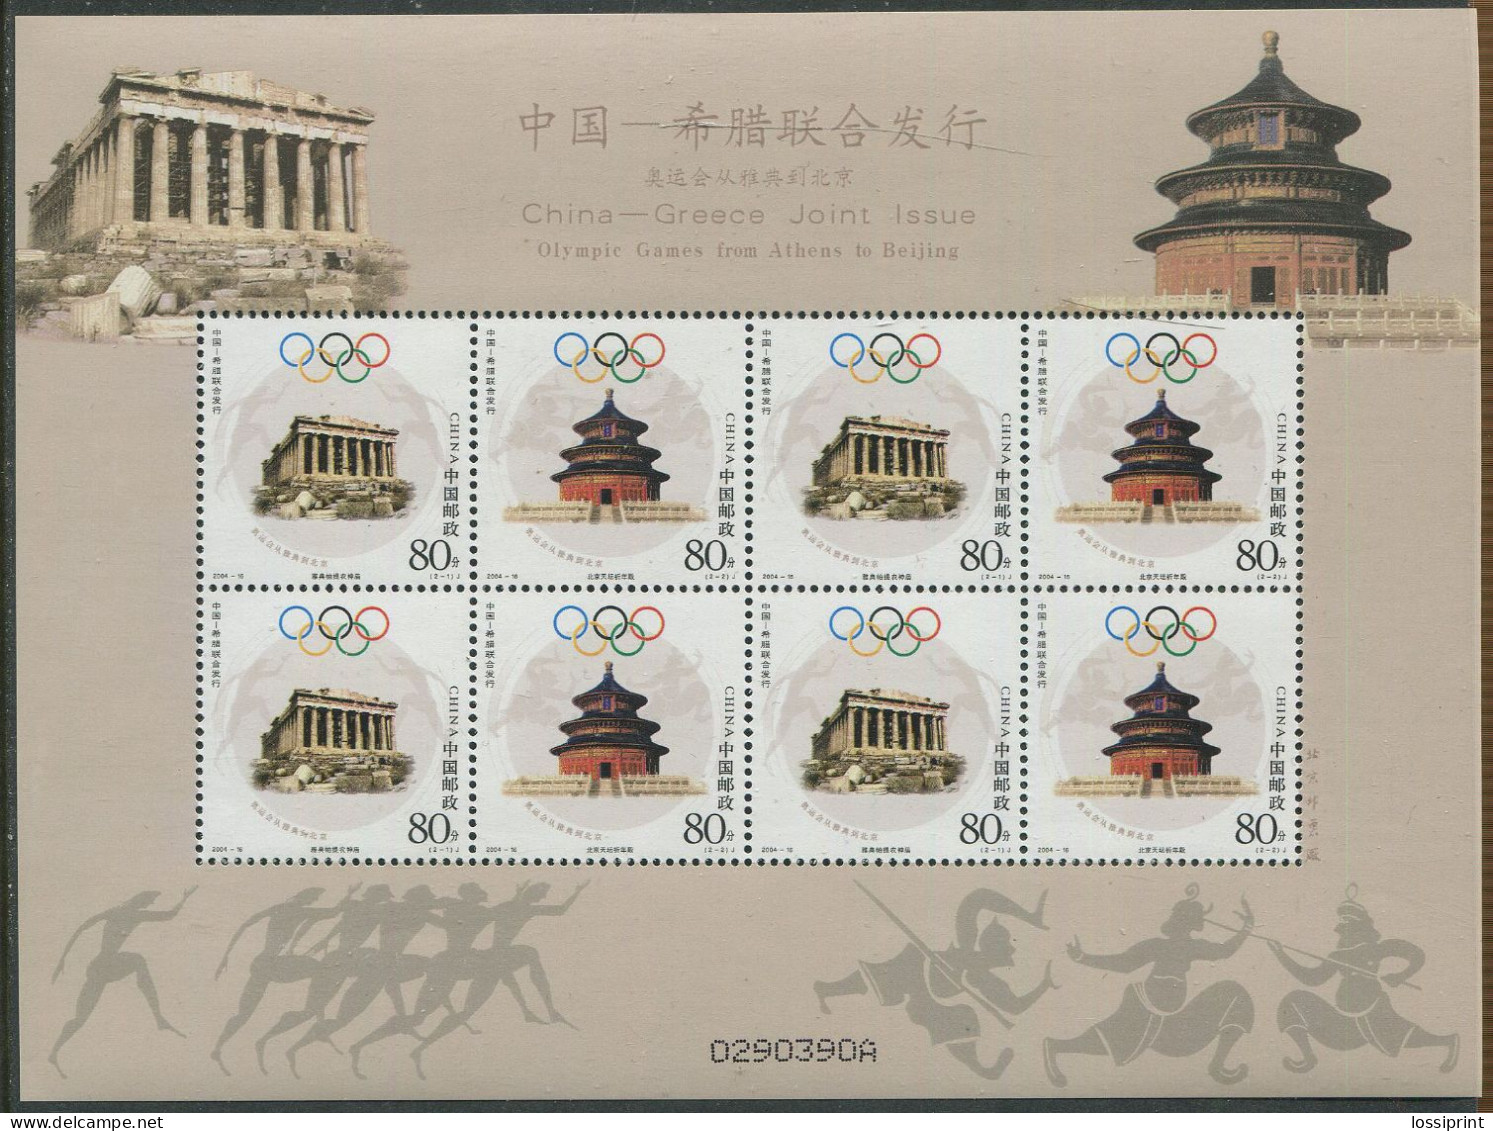 China:Greece:Unused Block Athens And Beijing Olympic Games, Joint Issue, 2004, MNH - Ete 2004: Athènes